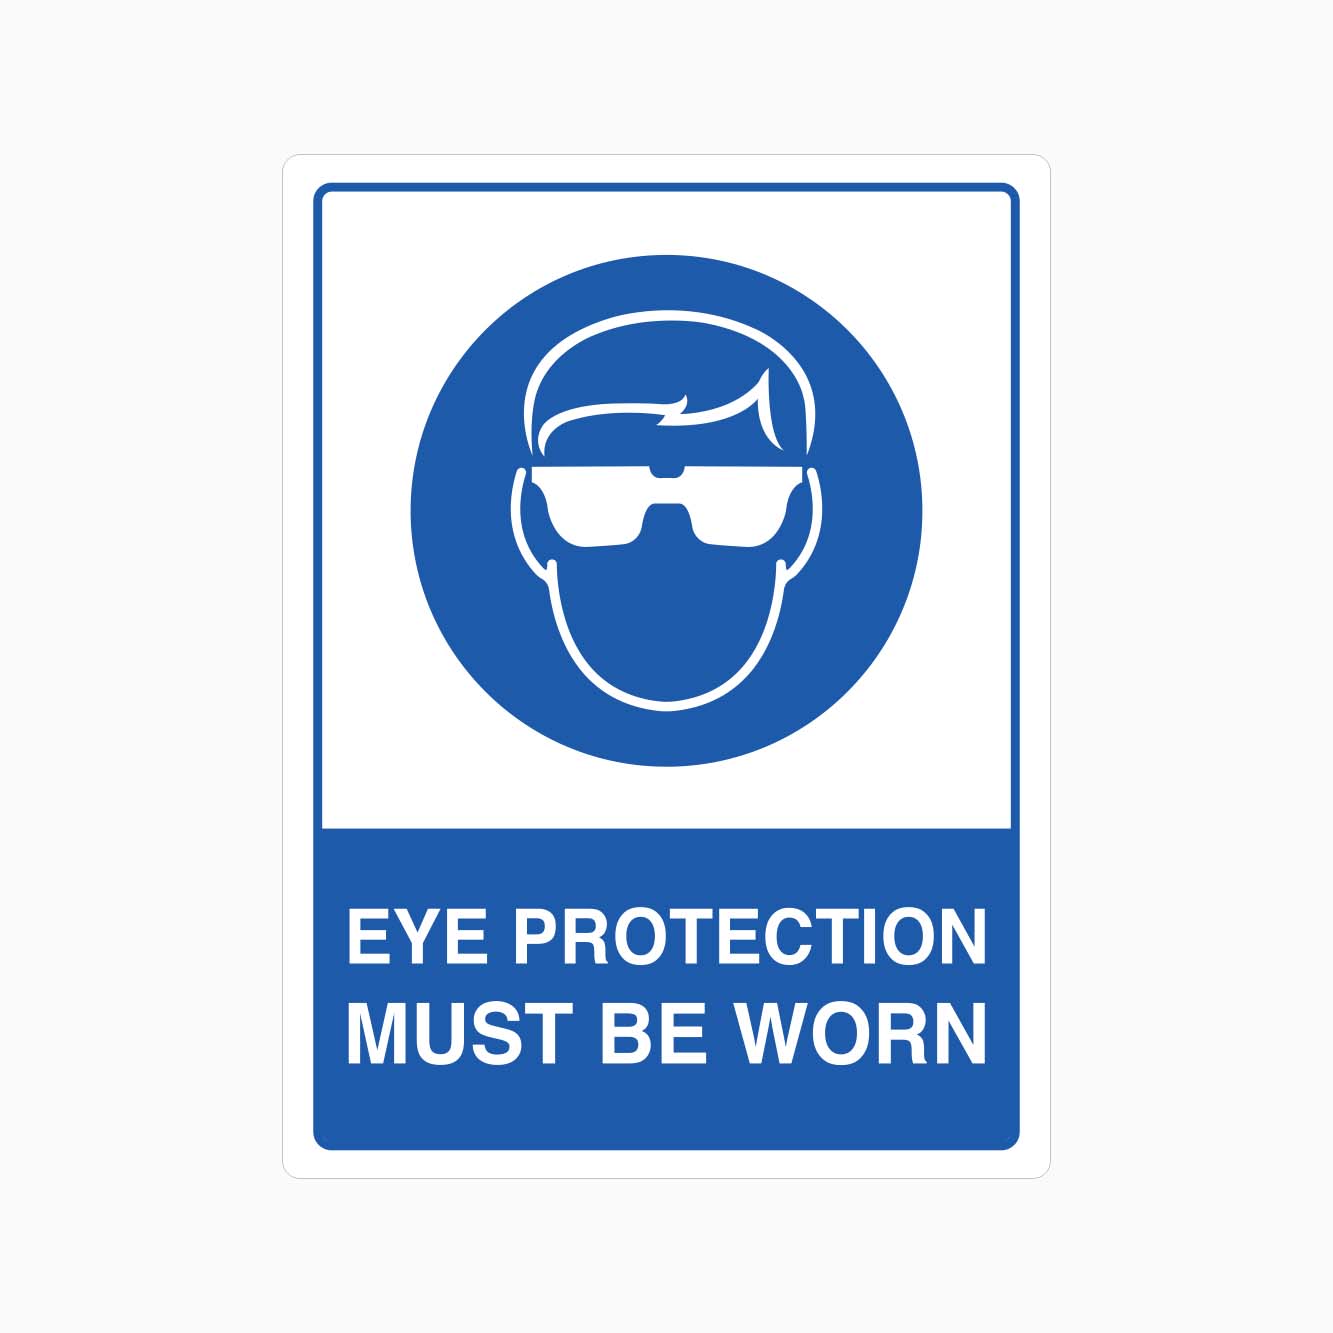 EYE PROTECTION MUST BE WORN SIGN - GET SIGNS